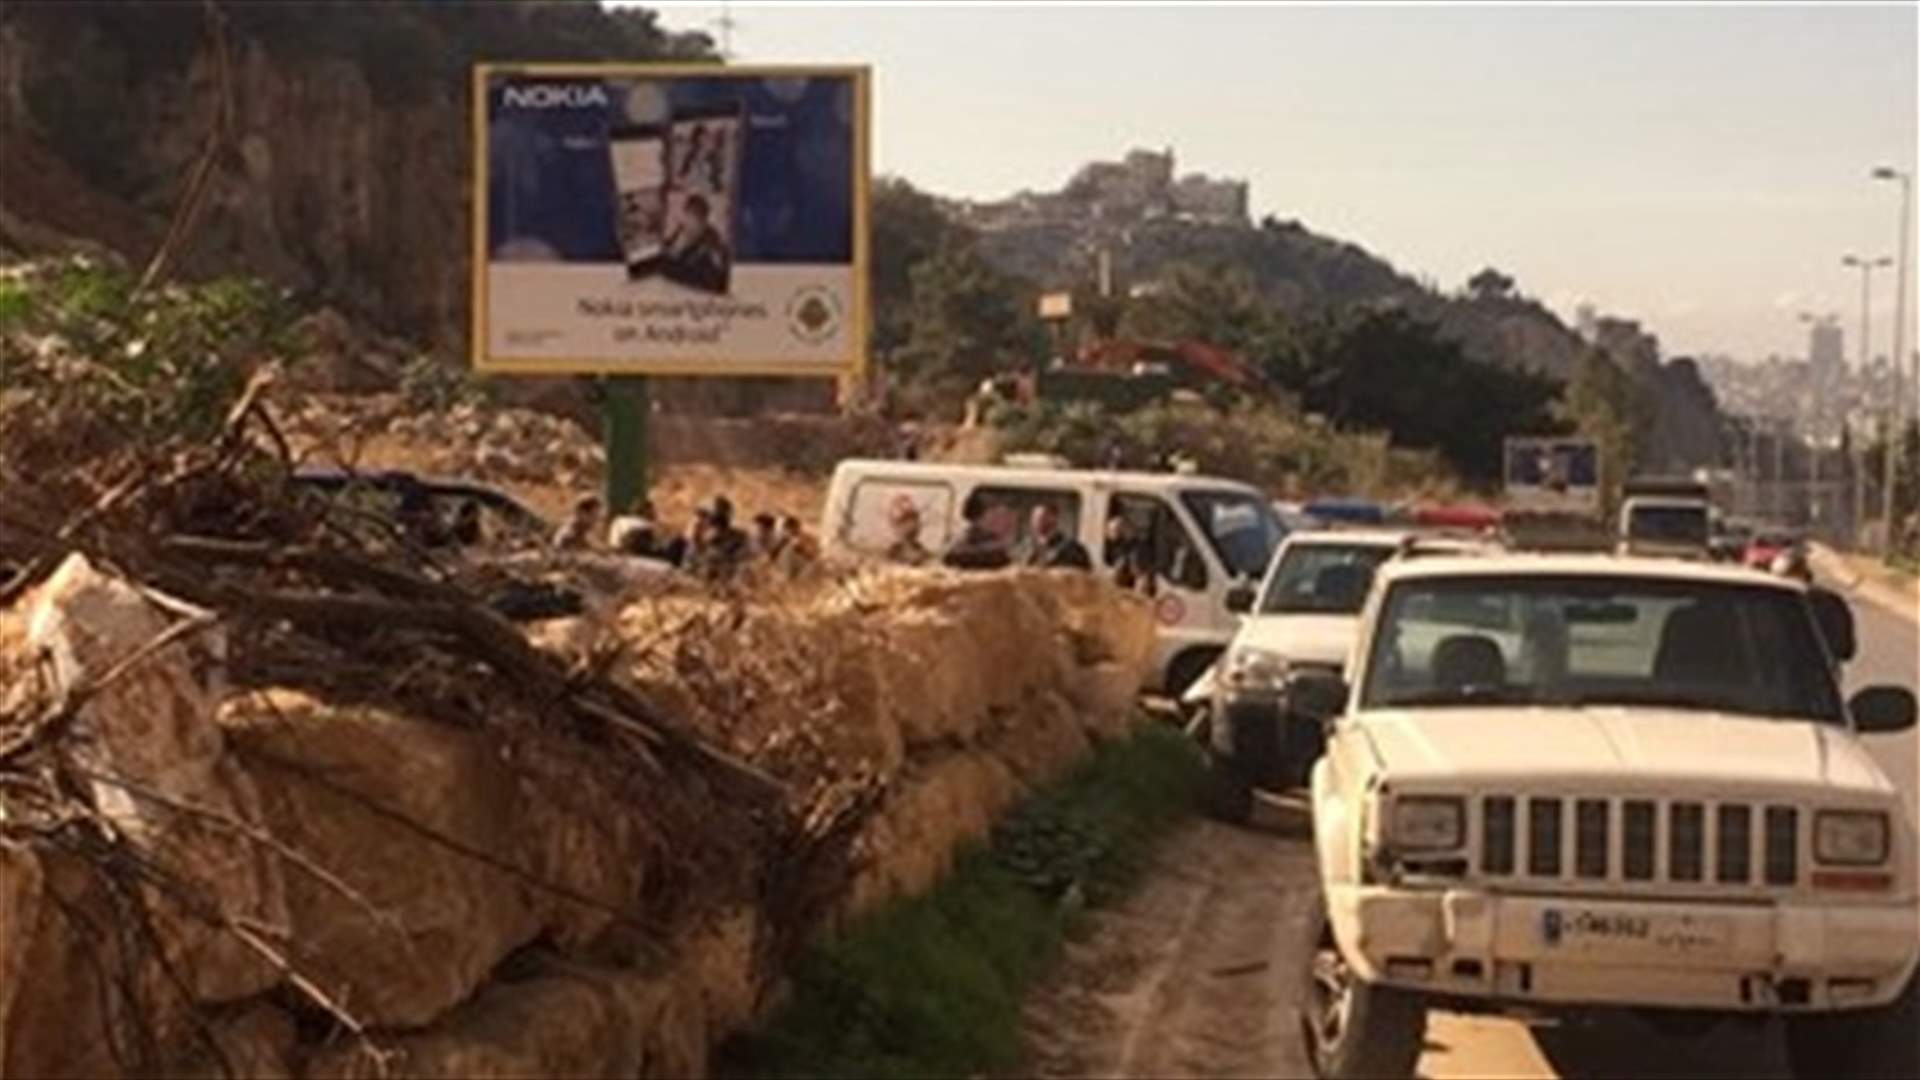 Body of a woman found on Metn highway